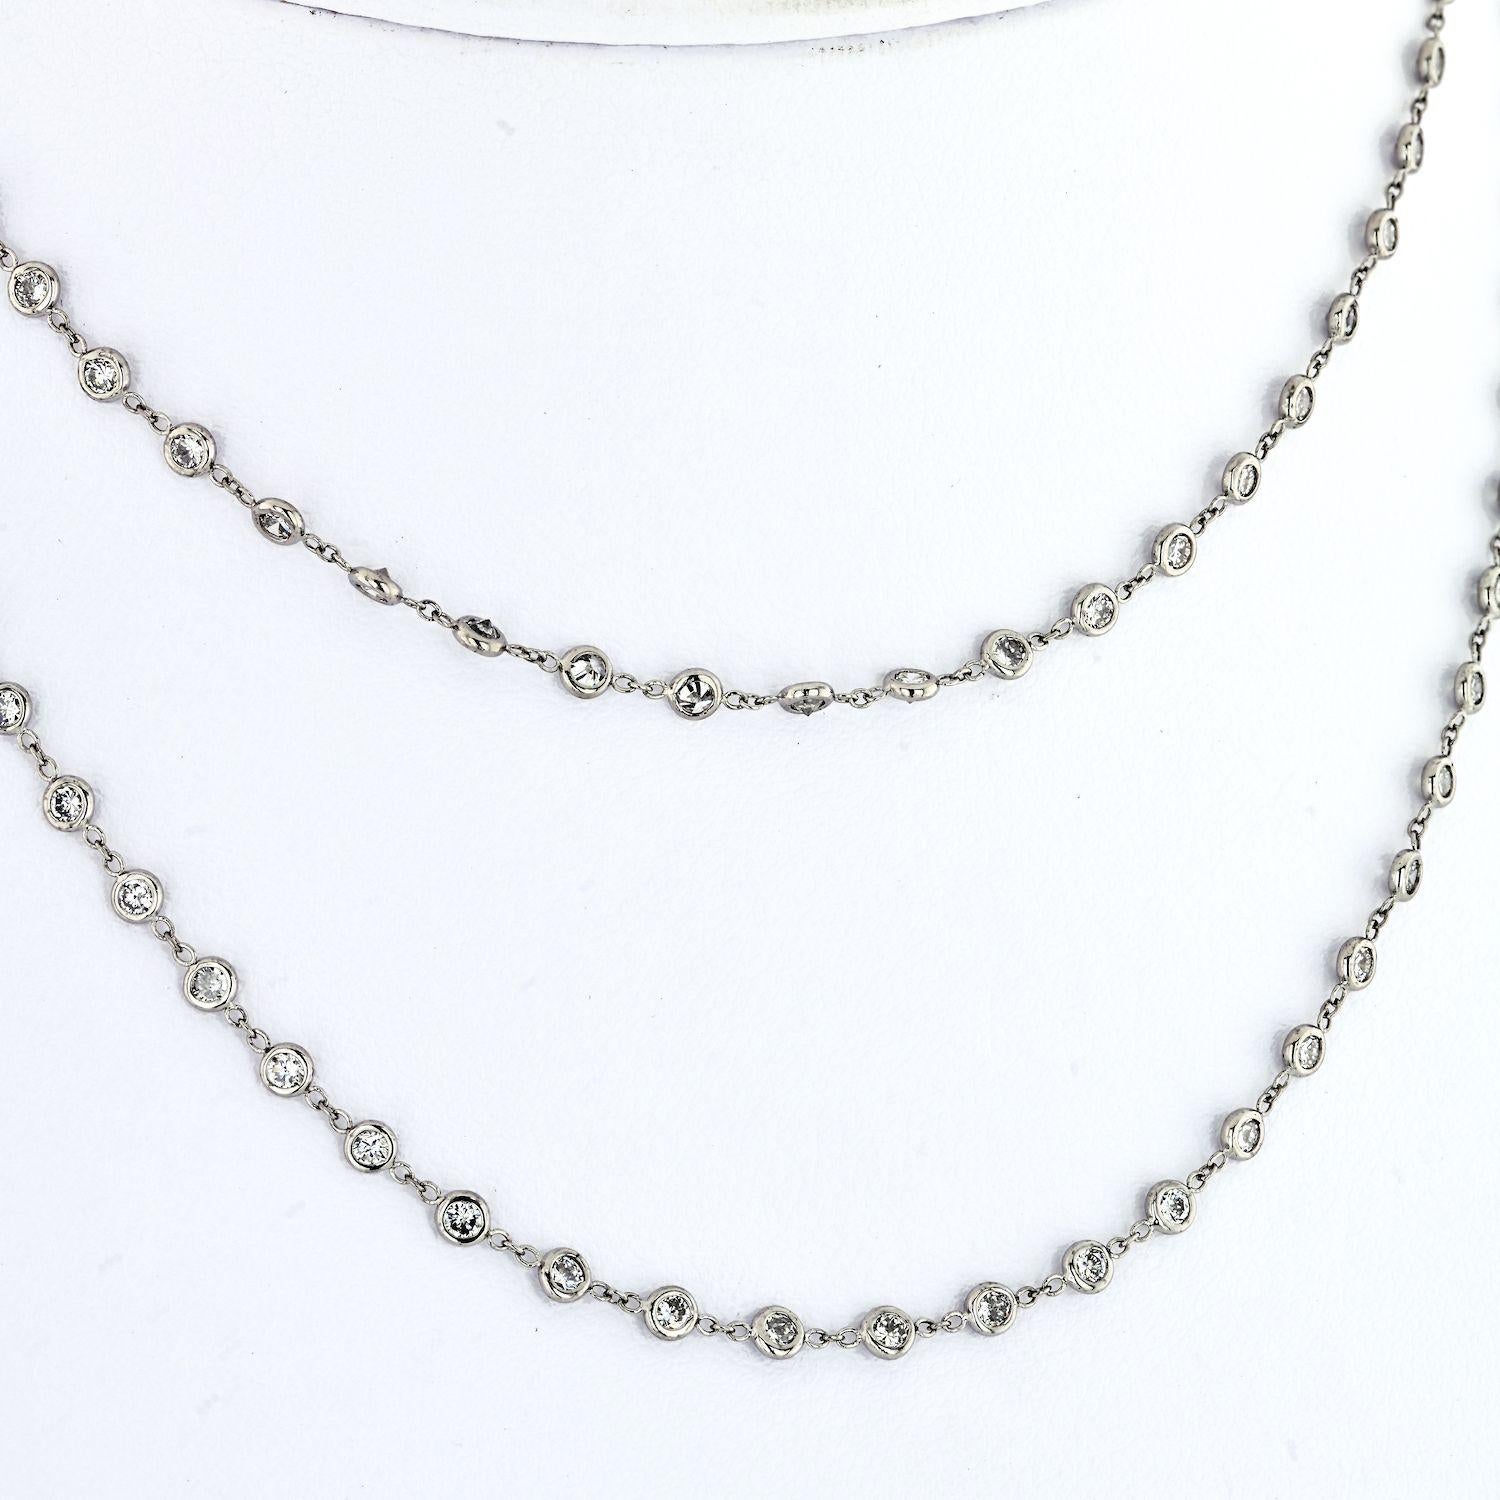 Platinum 5 carat Round Cut Diamonds by the Yard Necklace mounted with 117 stones all of clean and colorless quality.